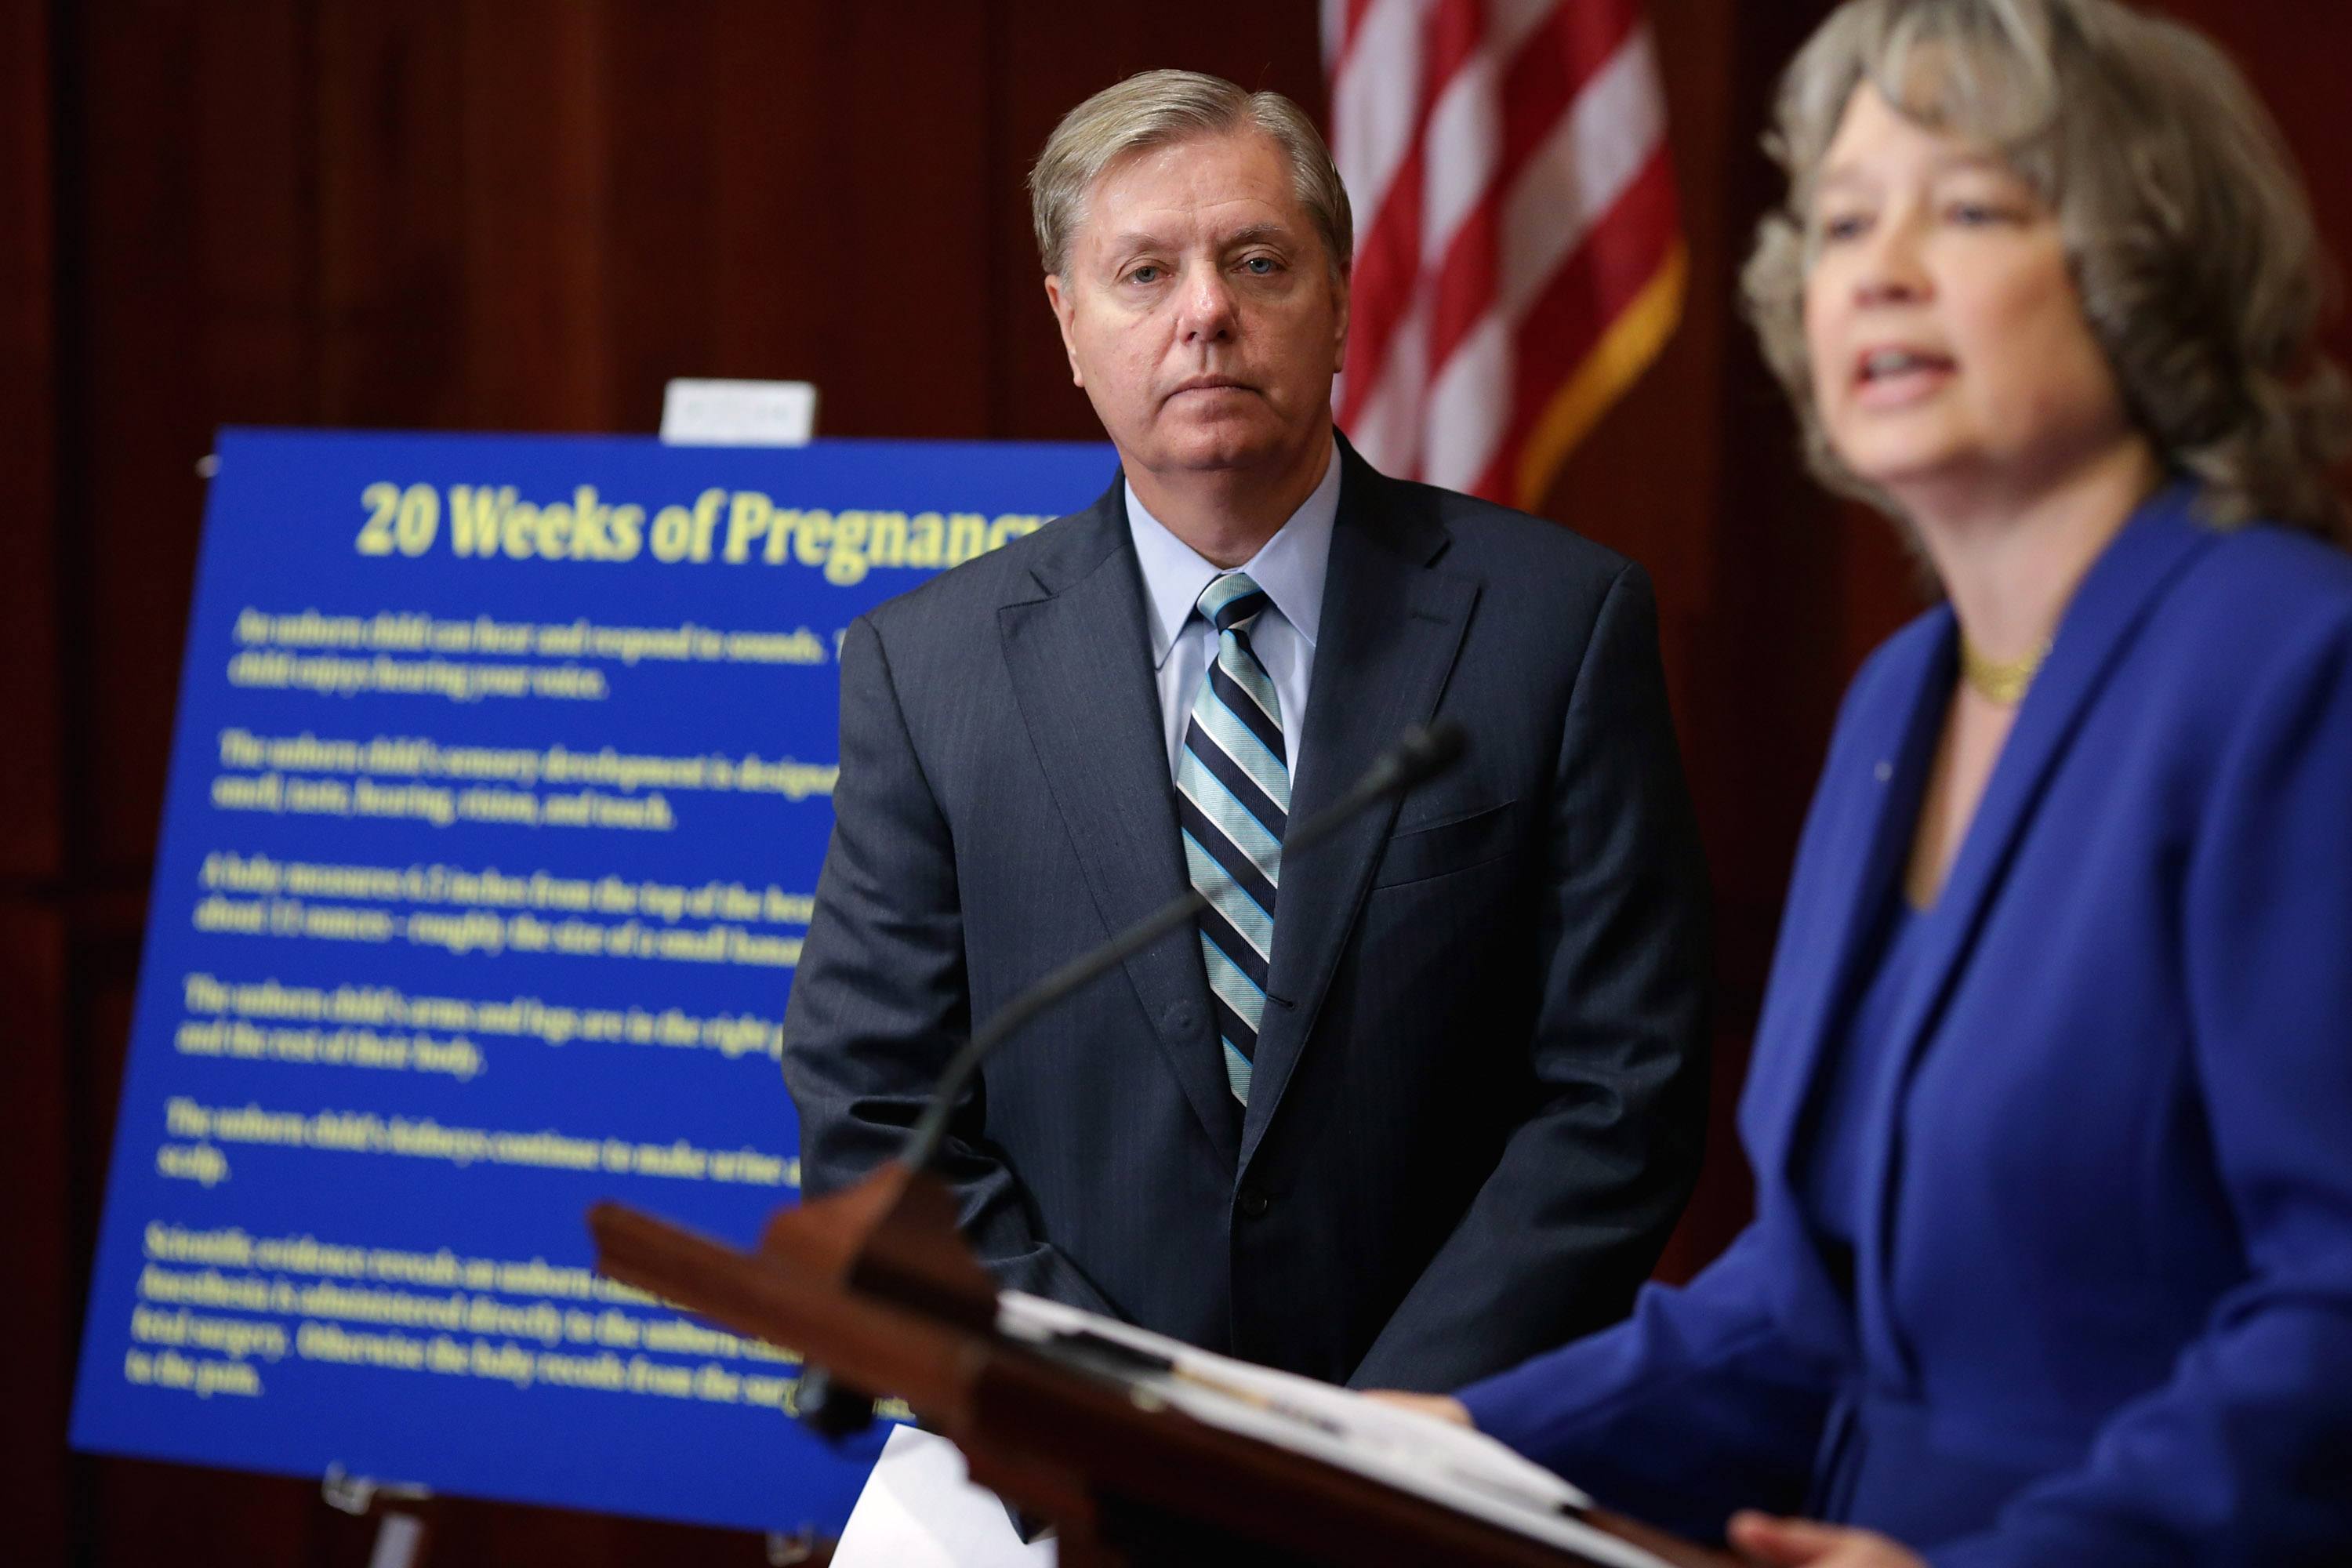 Sen. Lindsey Graham (R-SC) (L) listens to National Right to Life Committee President Carol Tobias speak while standing infront of a board that explains the Pain-Capable bill of banning abortions after 20 weeks